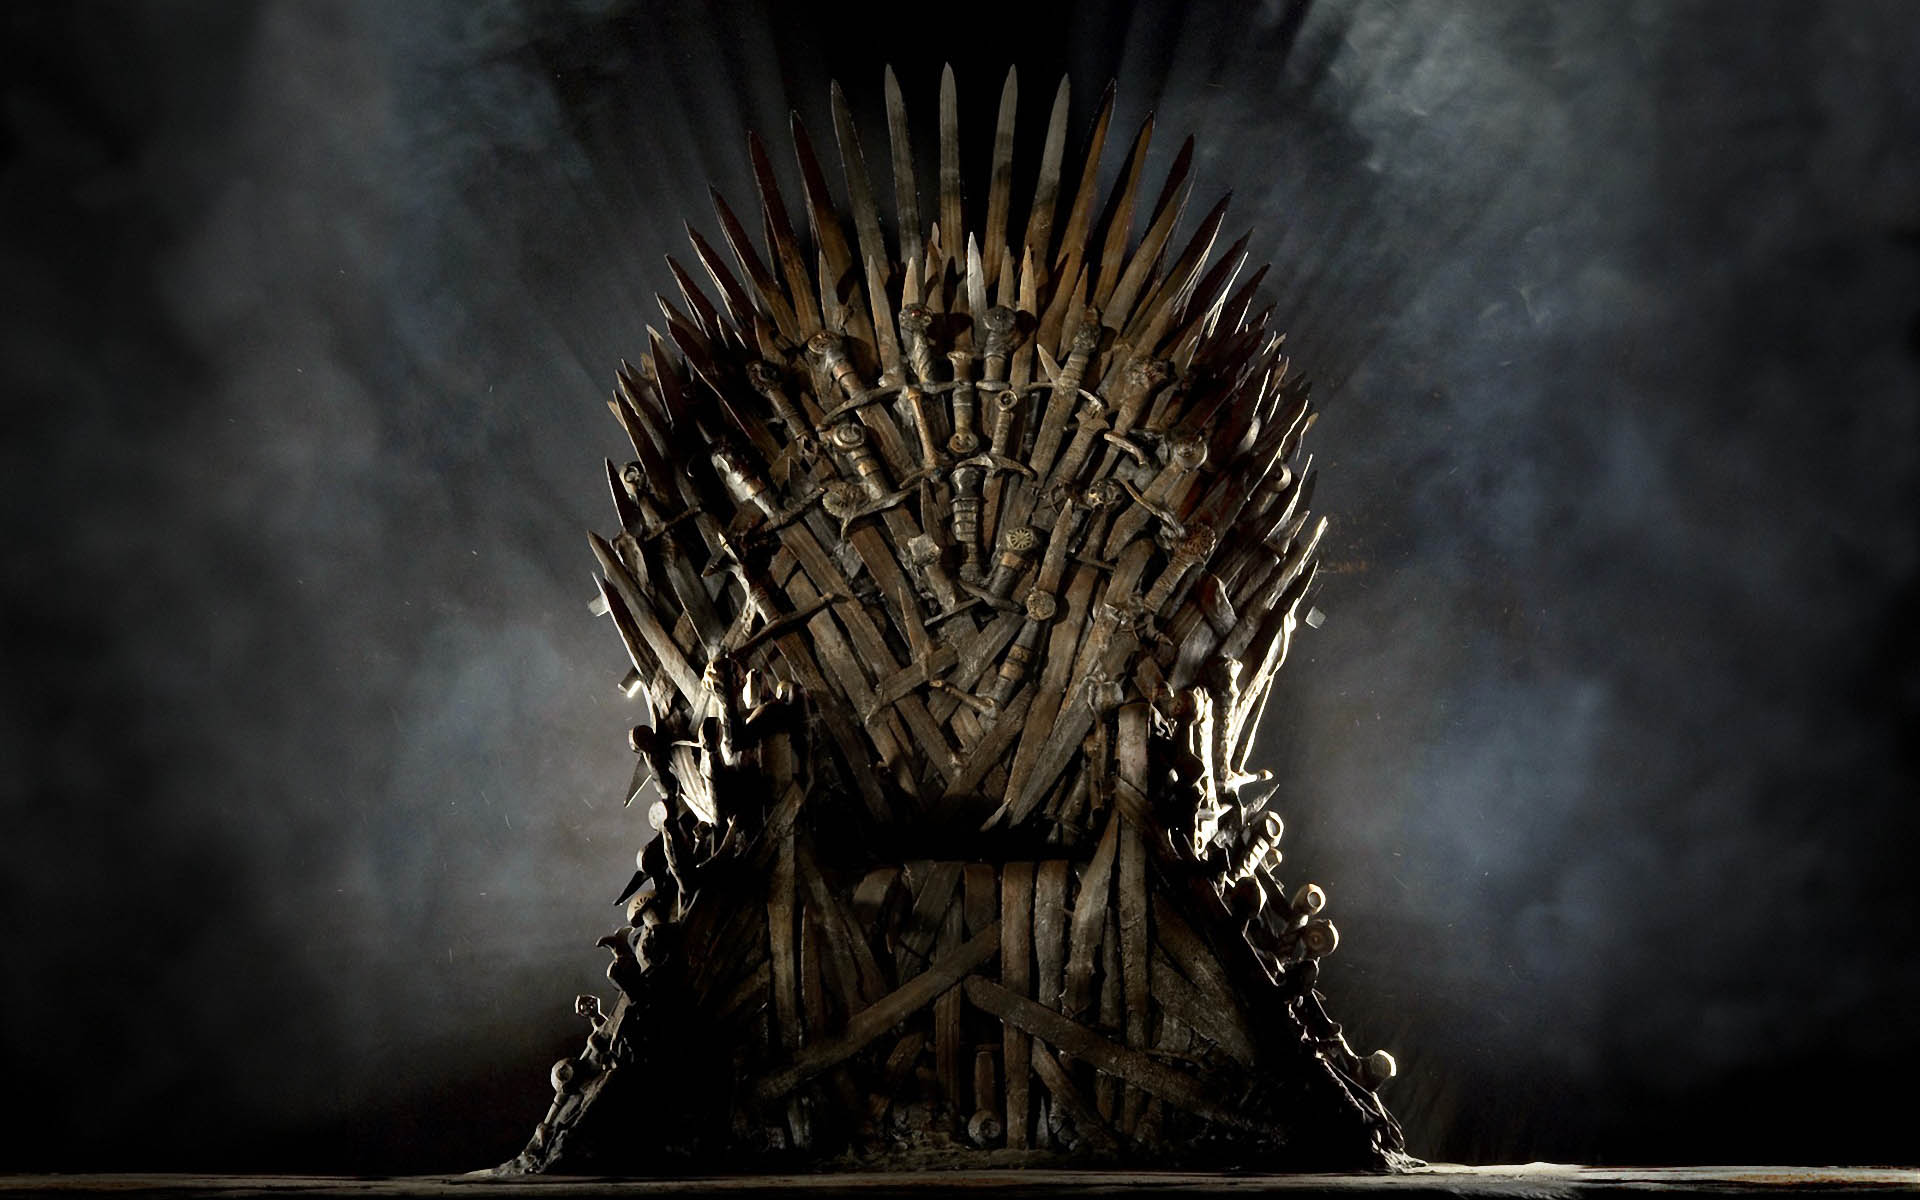 Best ‘Game of Thrones’ Branded Content